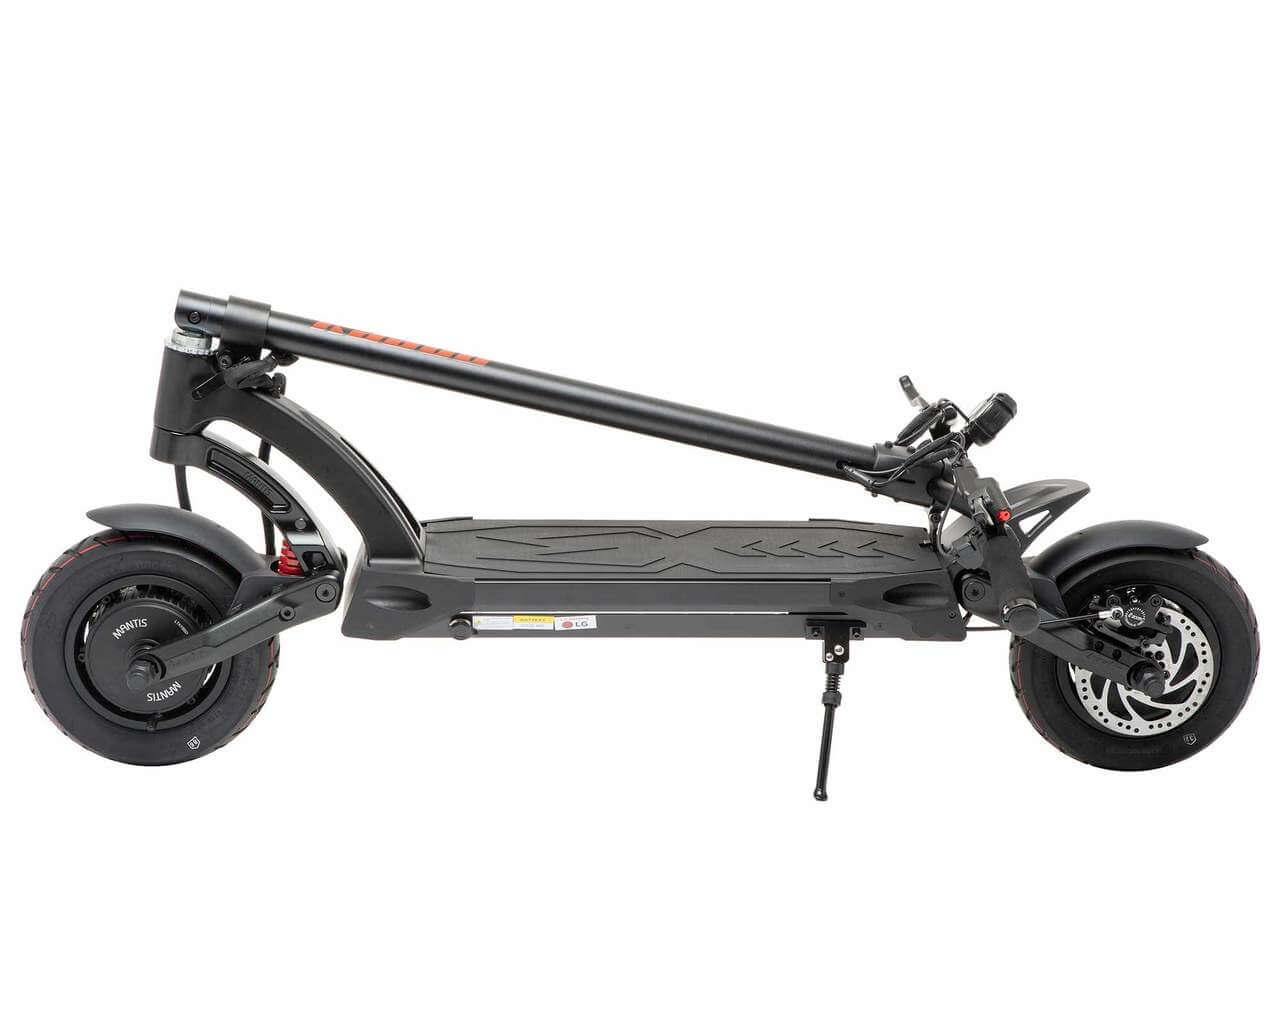 Kaabo Mantis 8 Dual Motor Electric Scooter